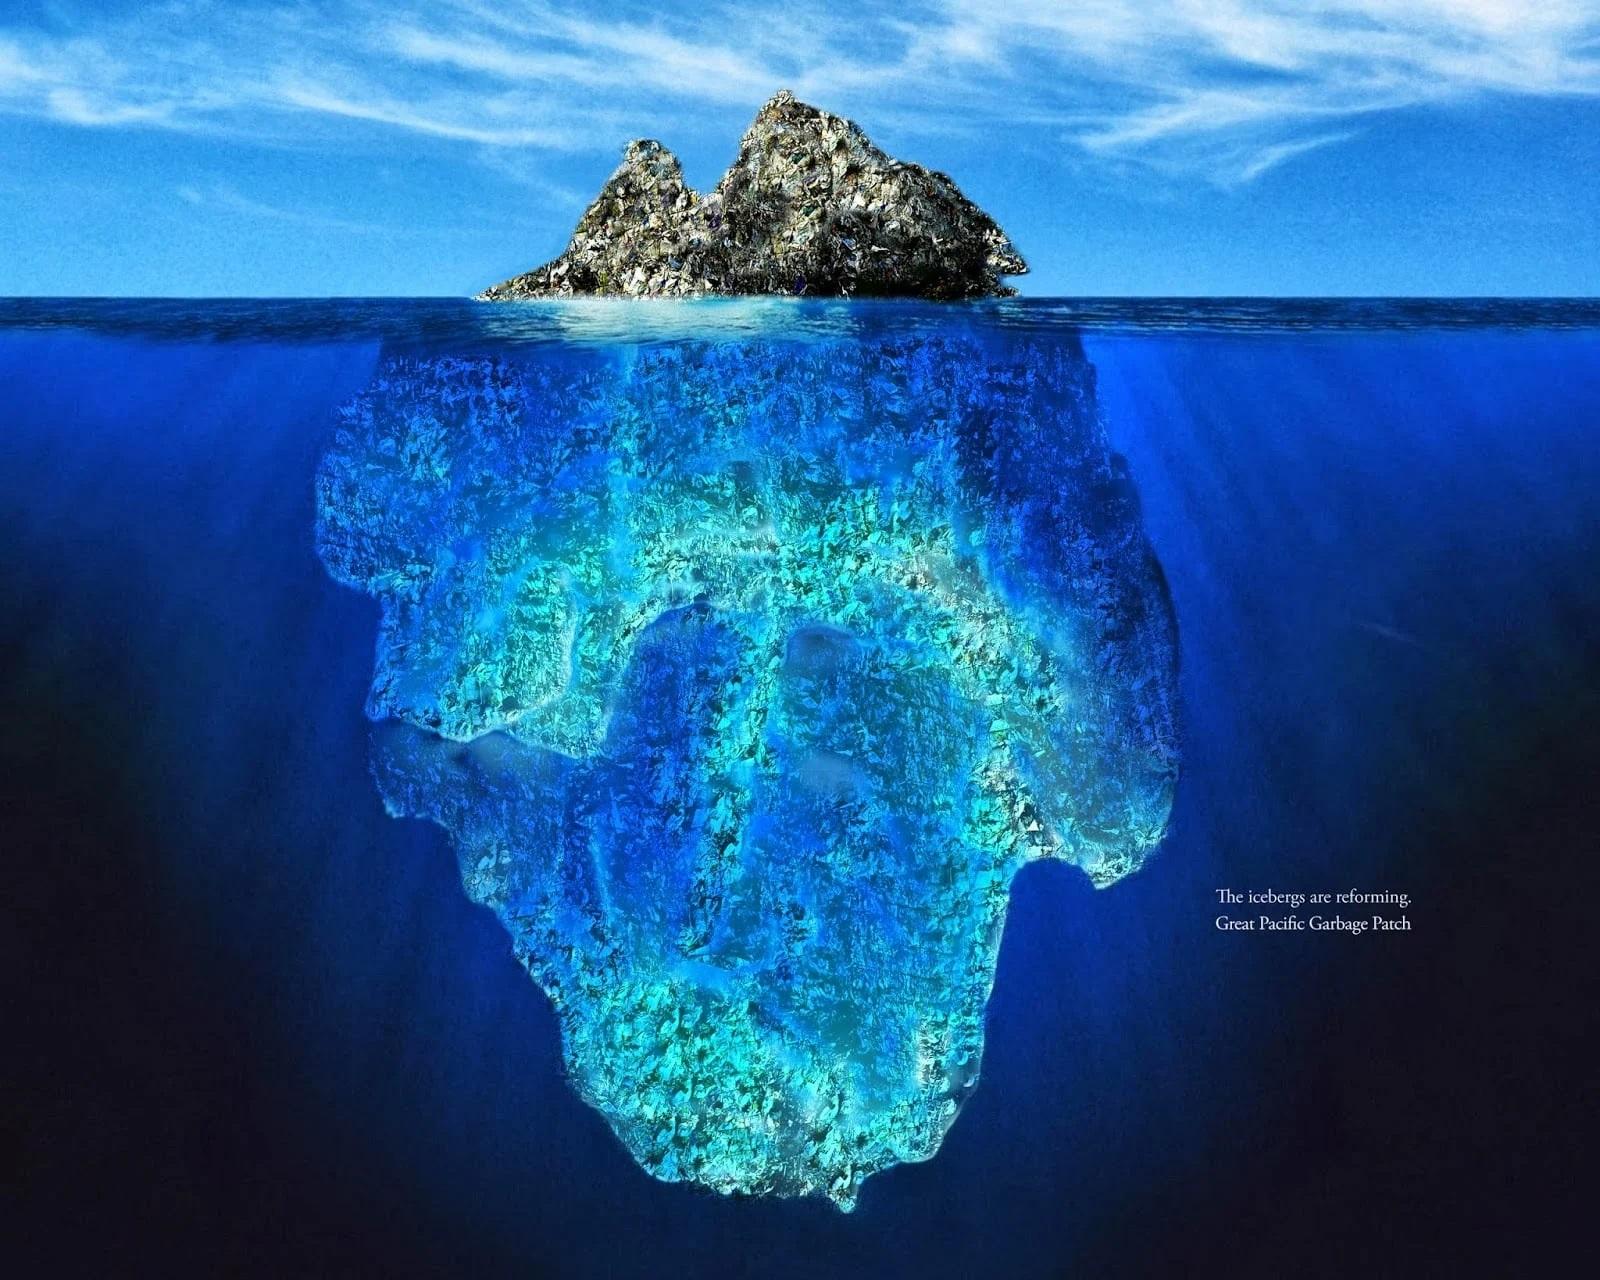 12. The Great Pacific Garbage Patch